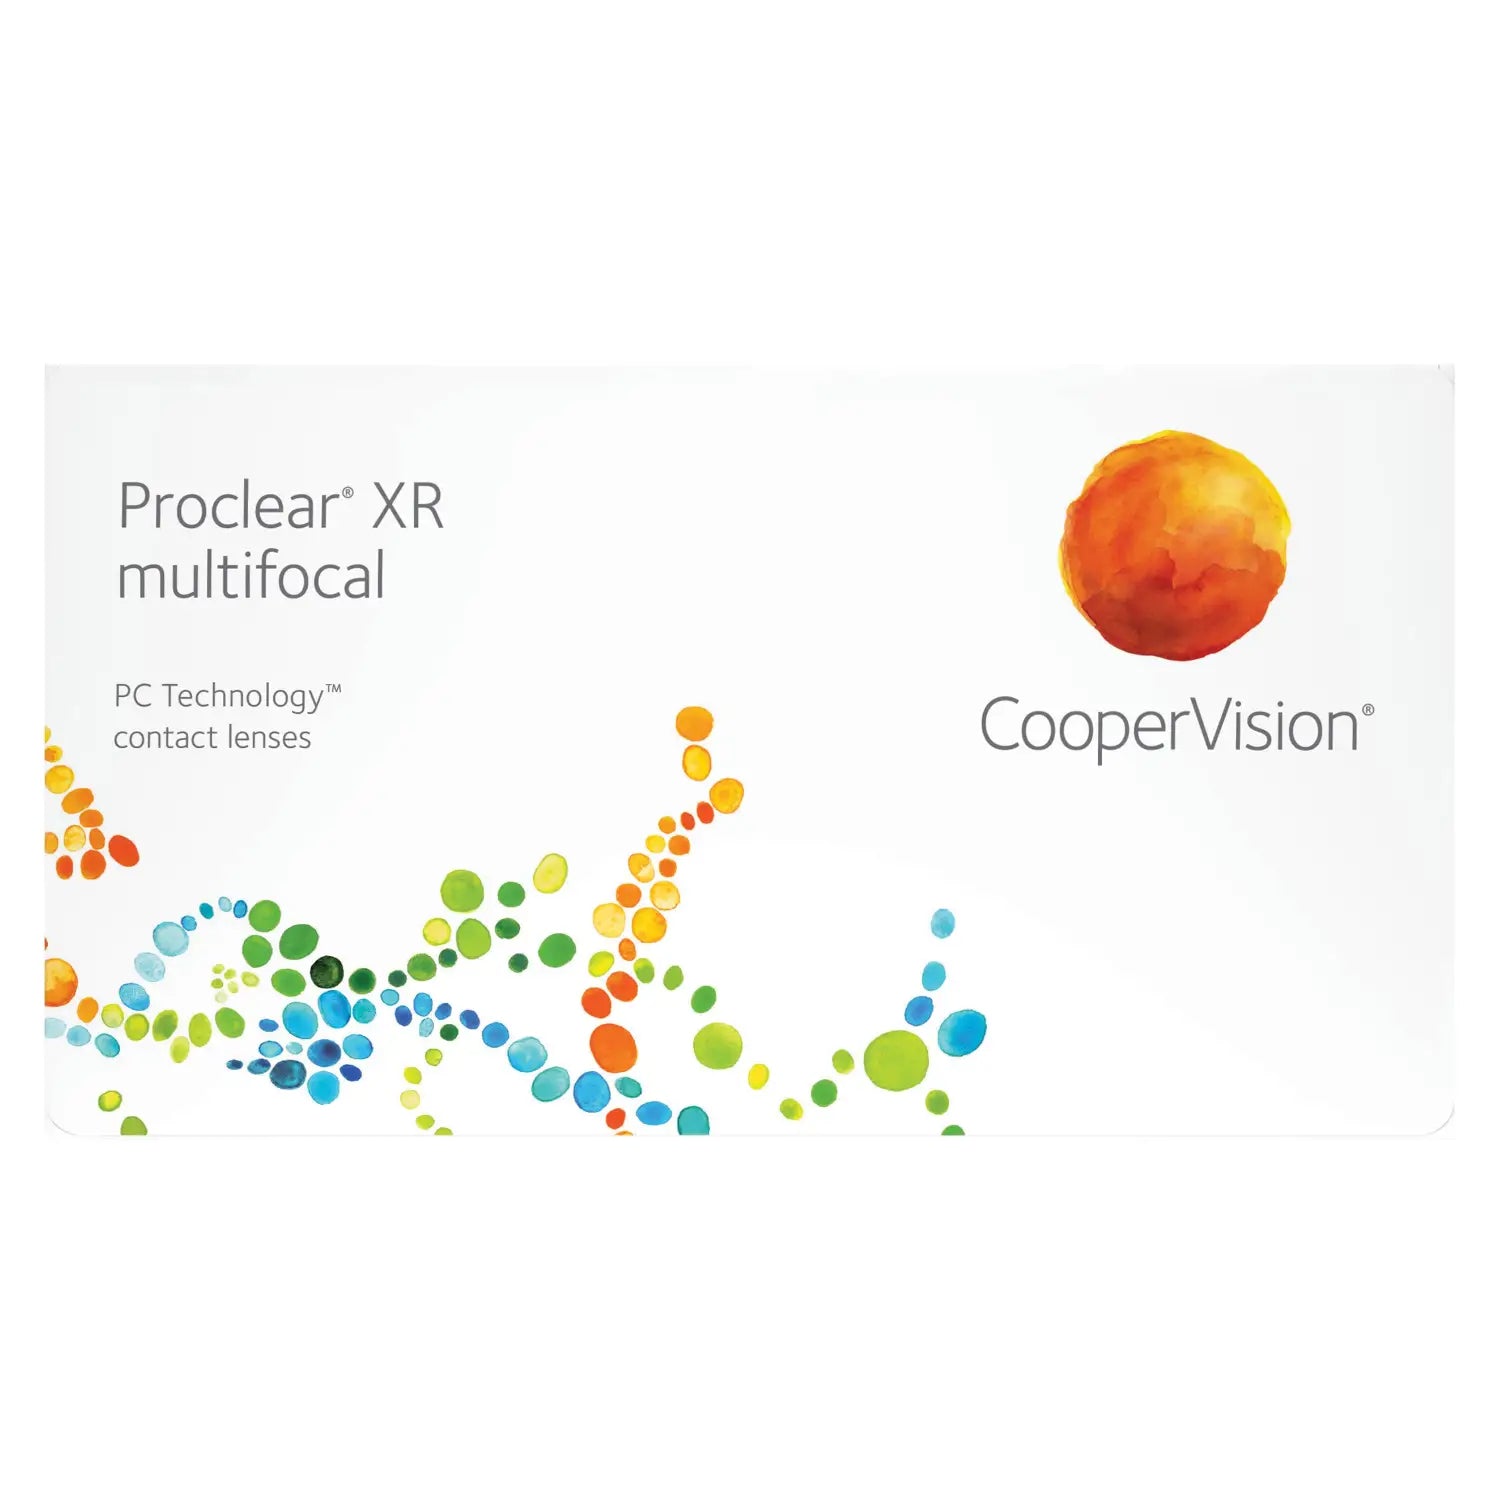 Proclear contact lenses